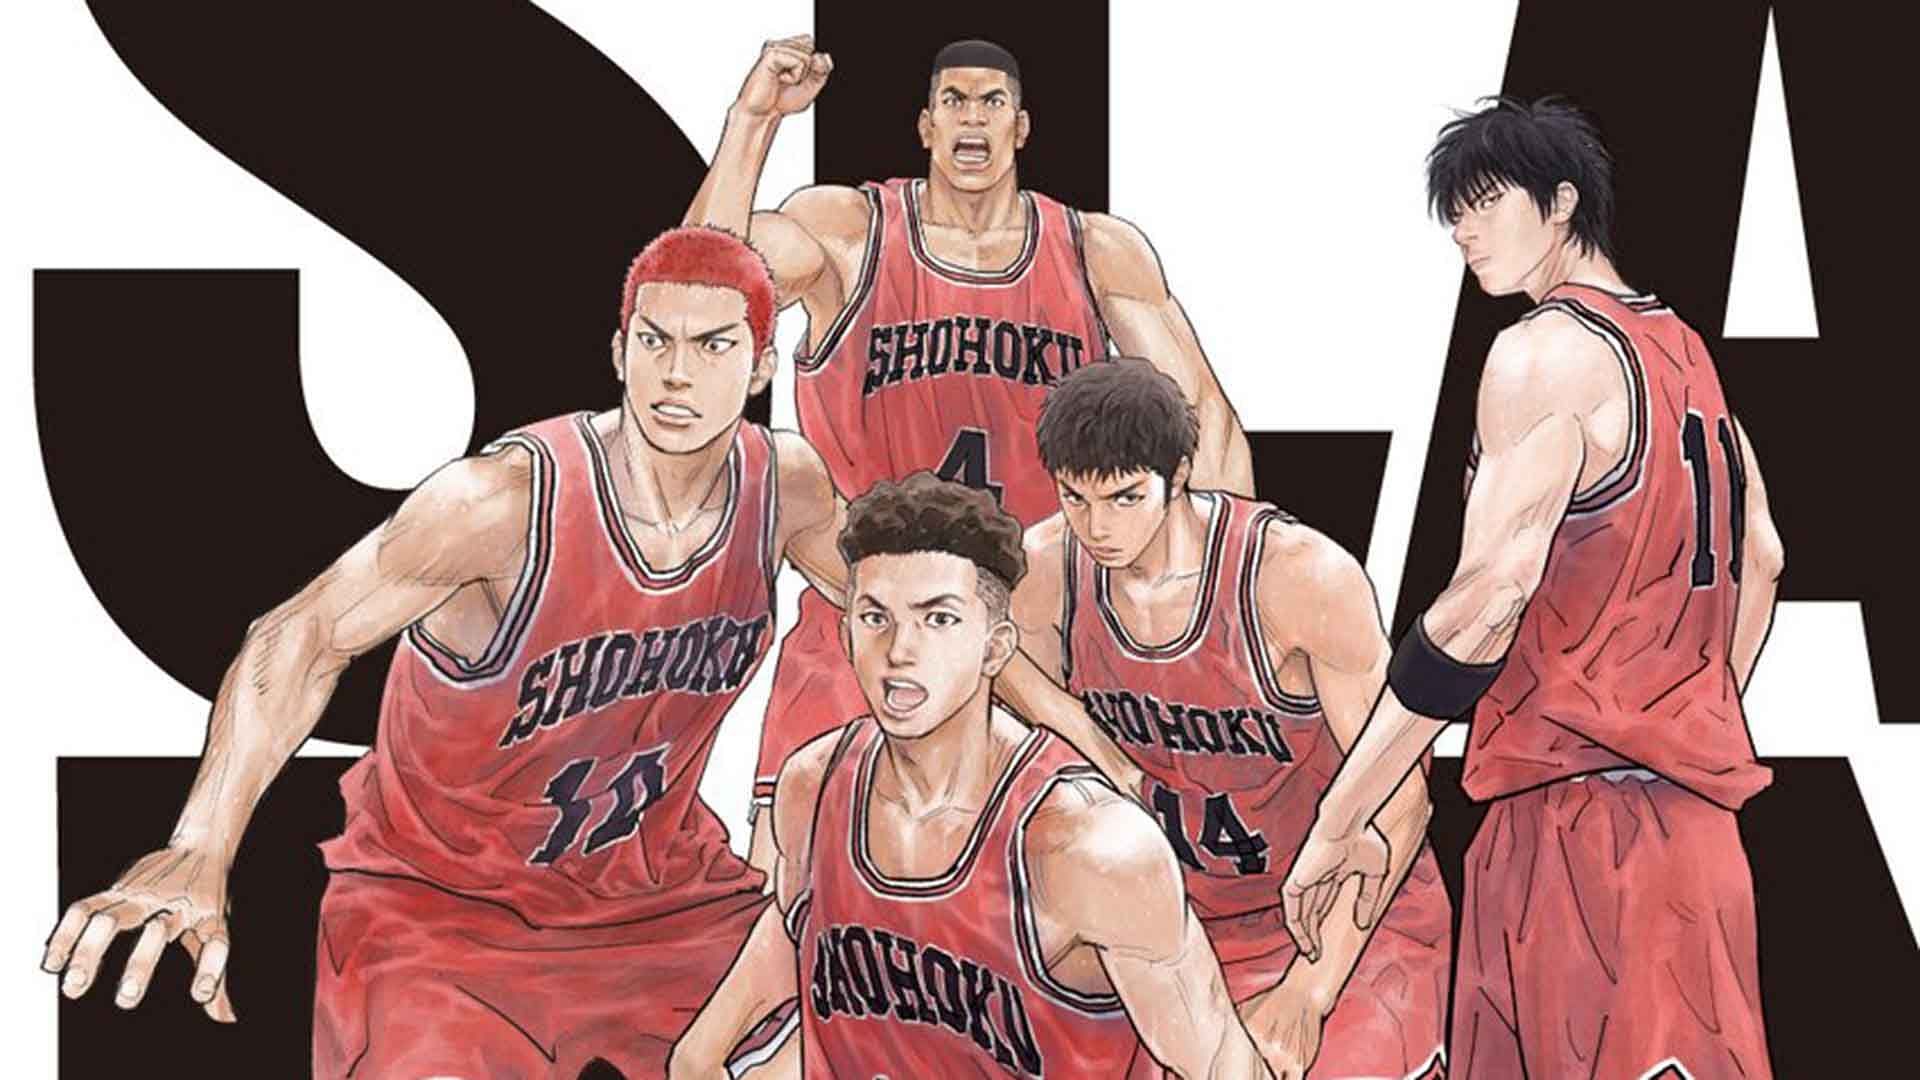 The First Slam Dunk anime film set to be distributed by GKIDS in North America (Image via Toei Animation)